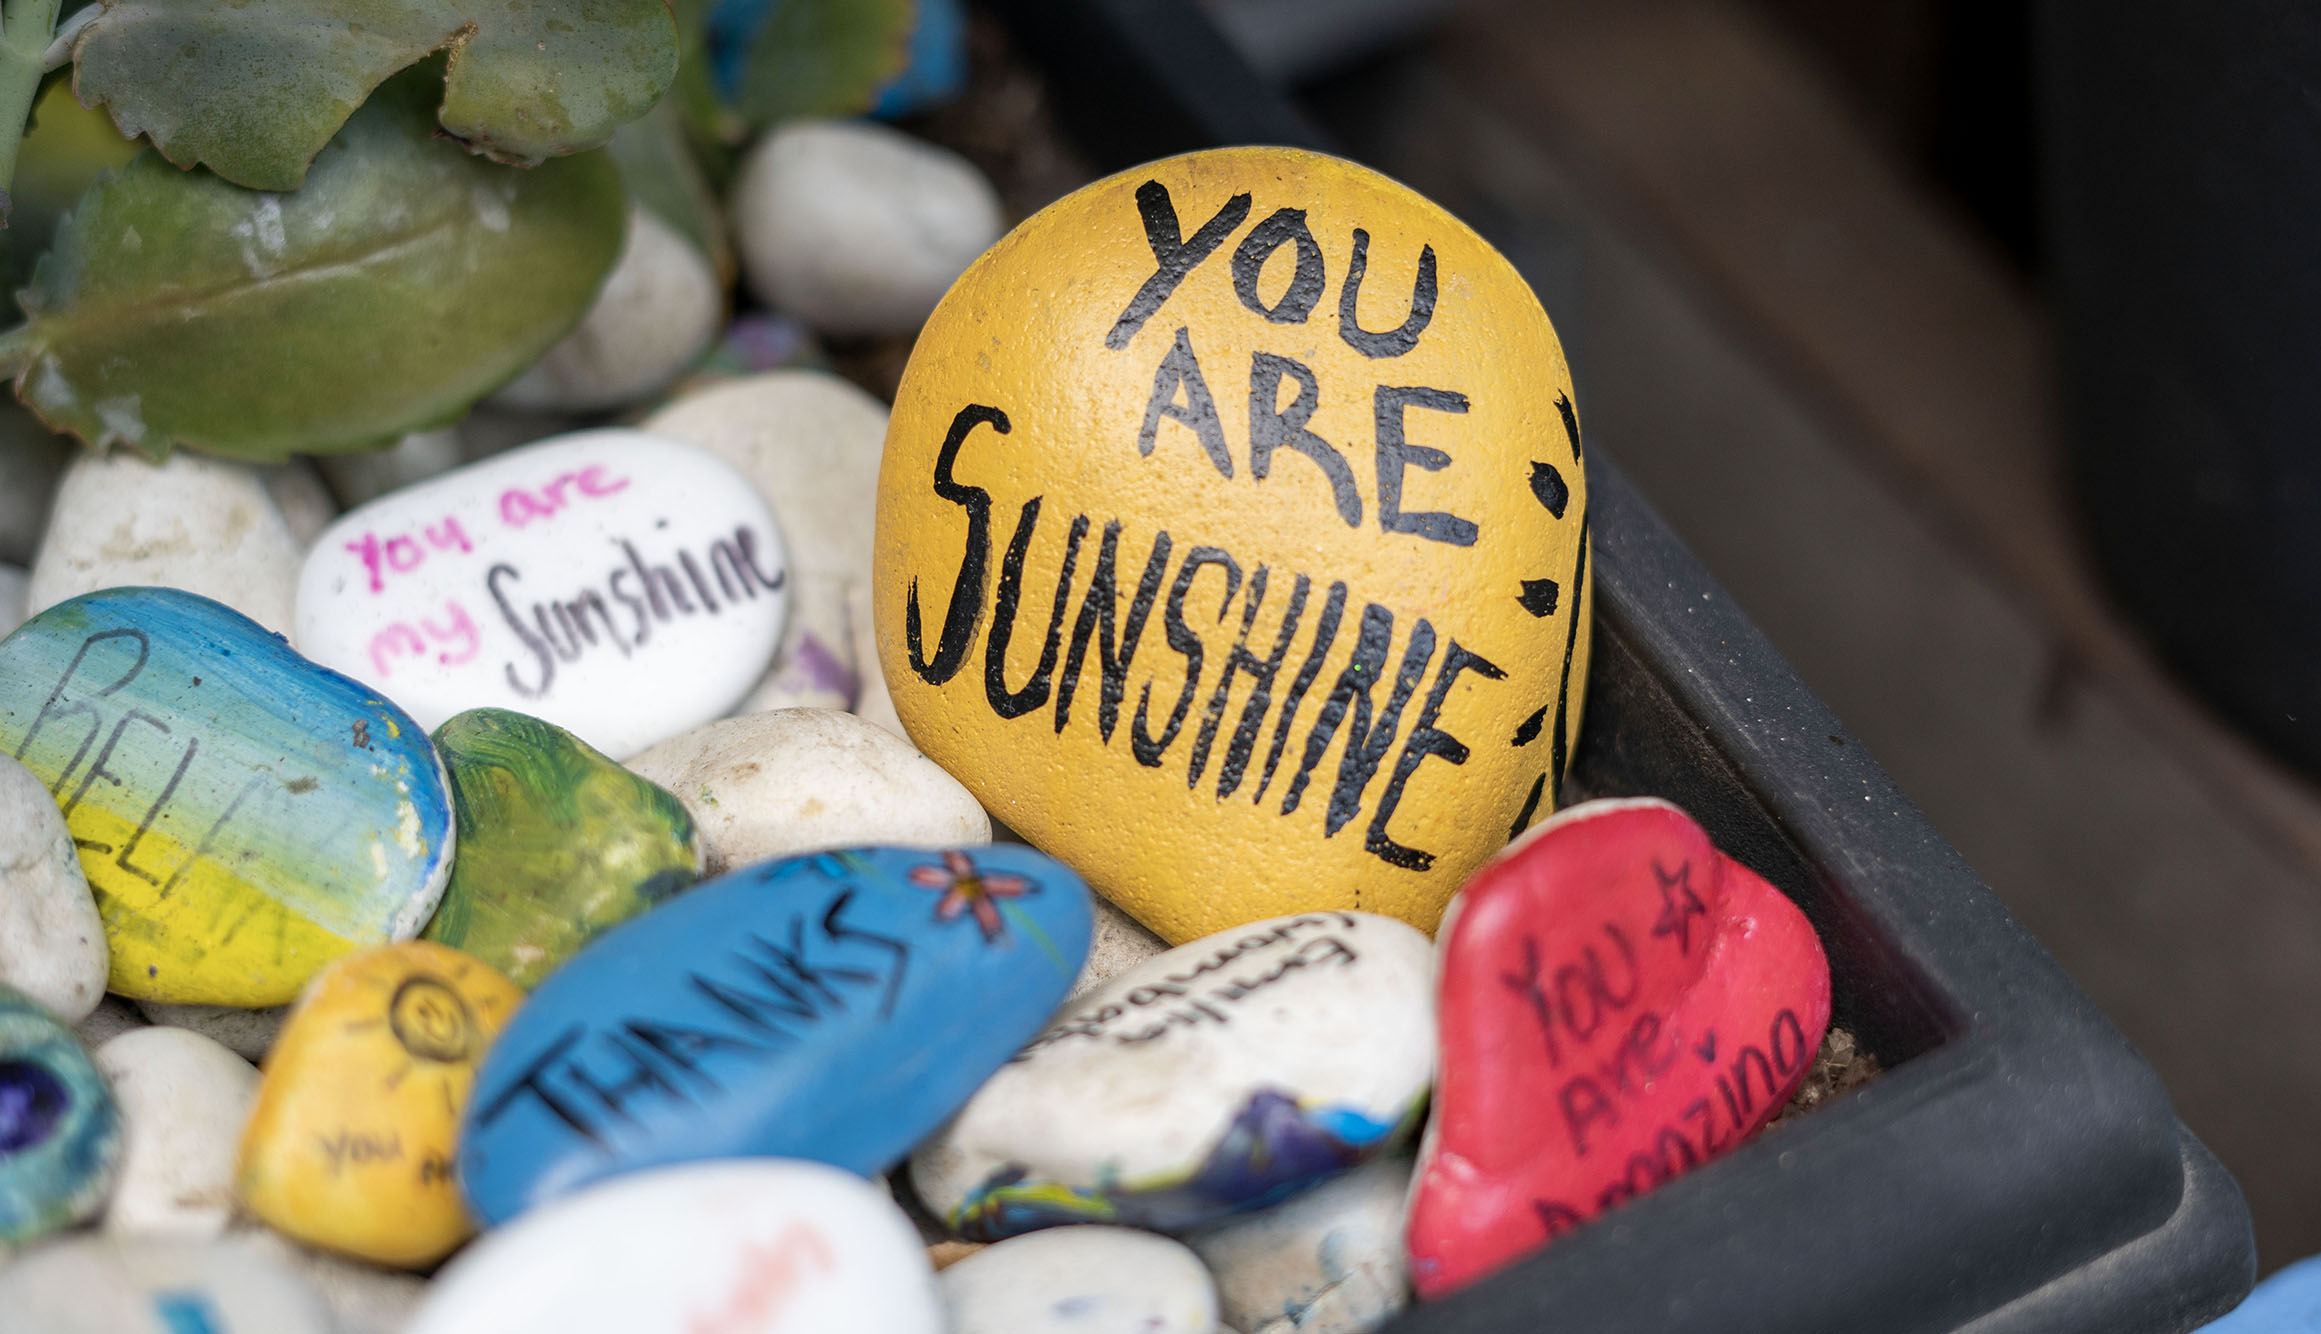 A collection of painted rocks. The biggest rock is yellow with the words 'you are sunshine'.